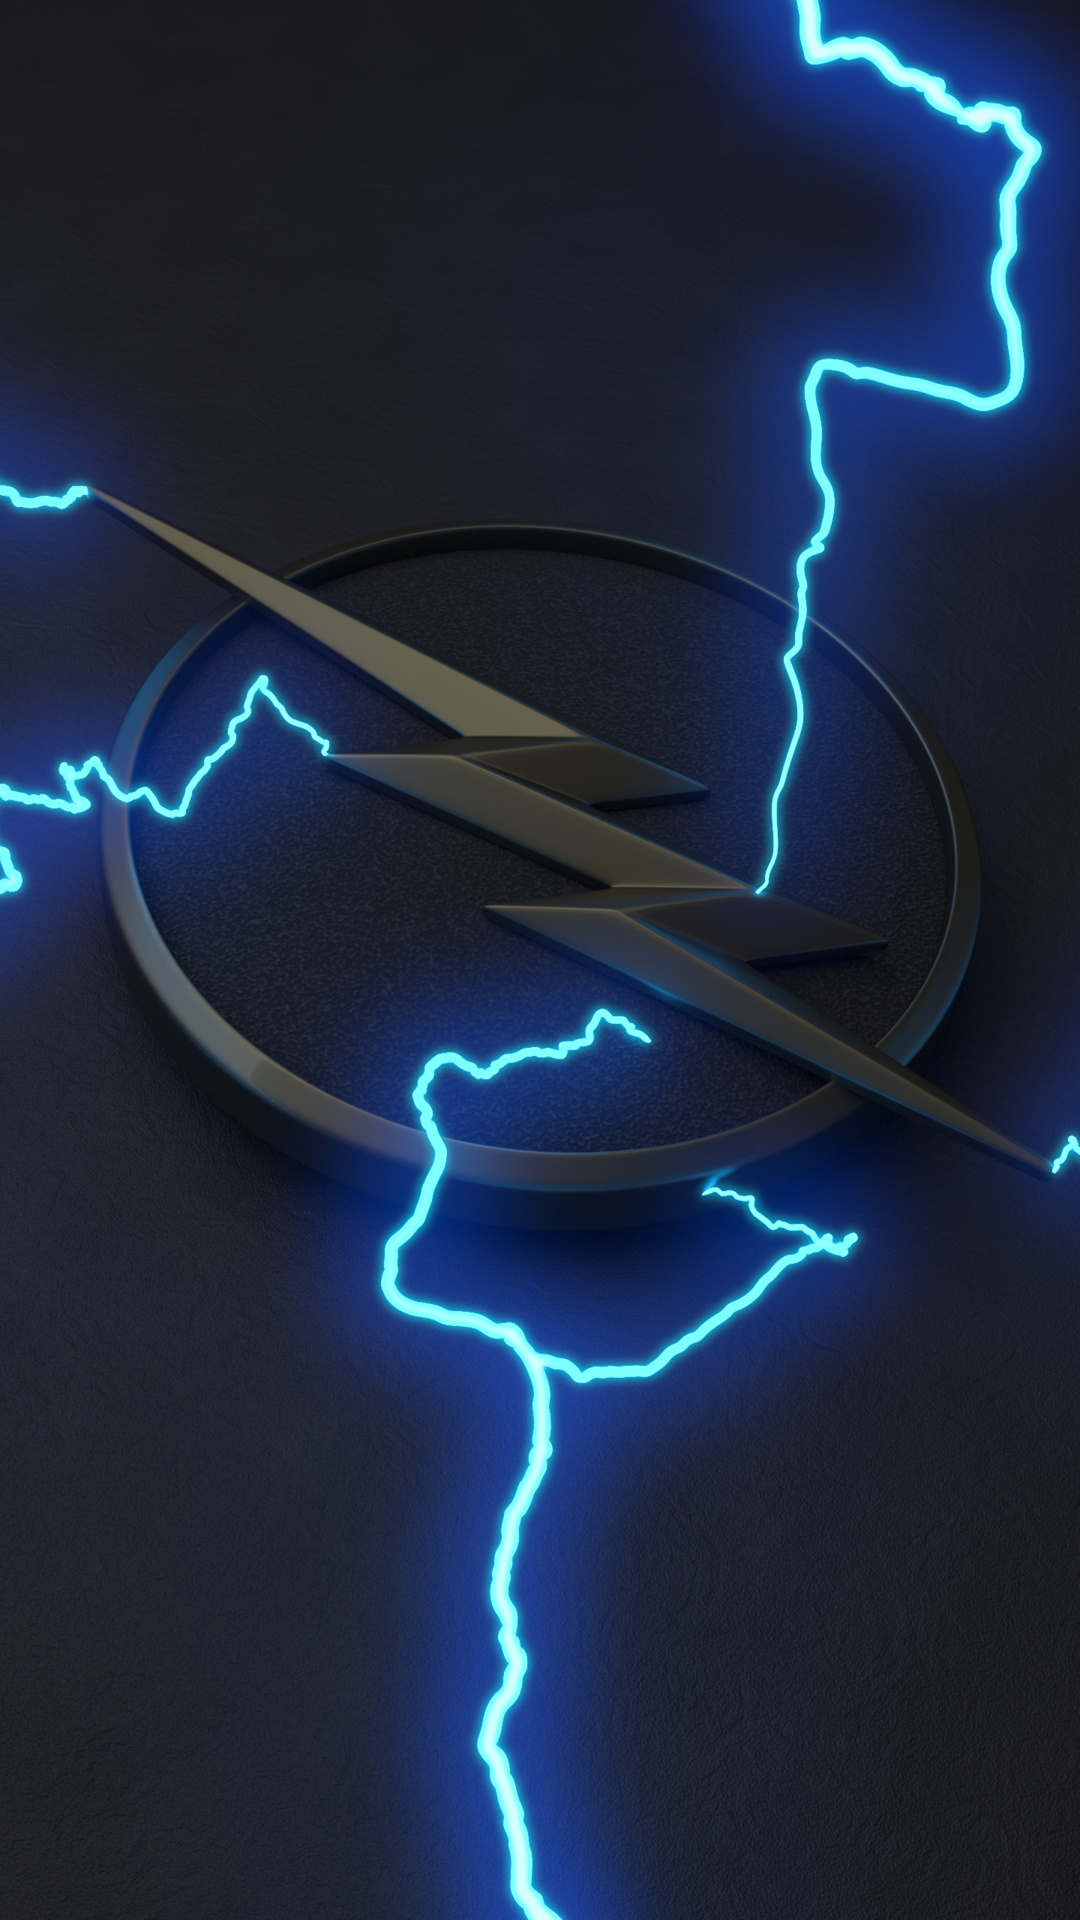 Electrified 3d Zoom Wallpaper 1080p More Sizes And Another